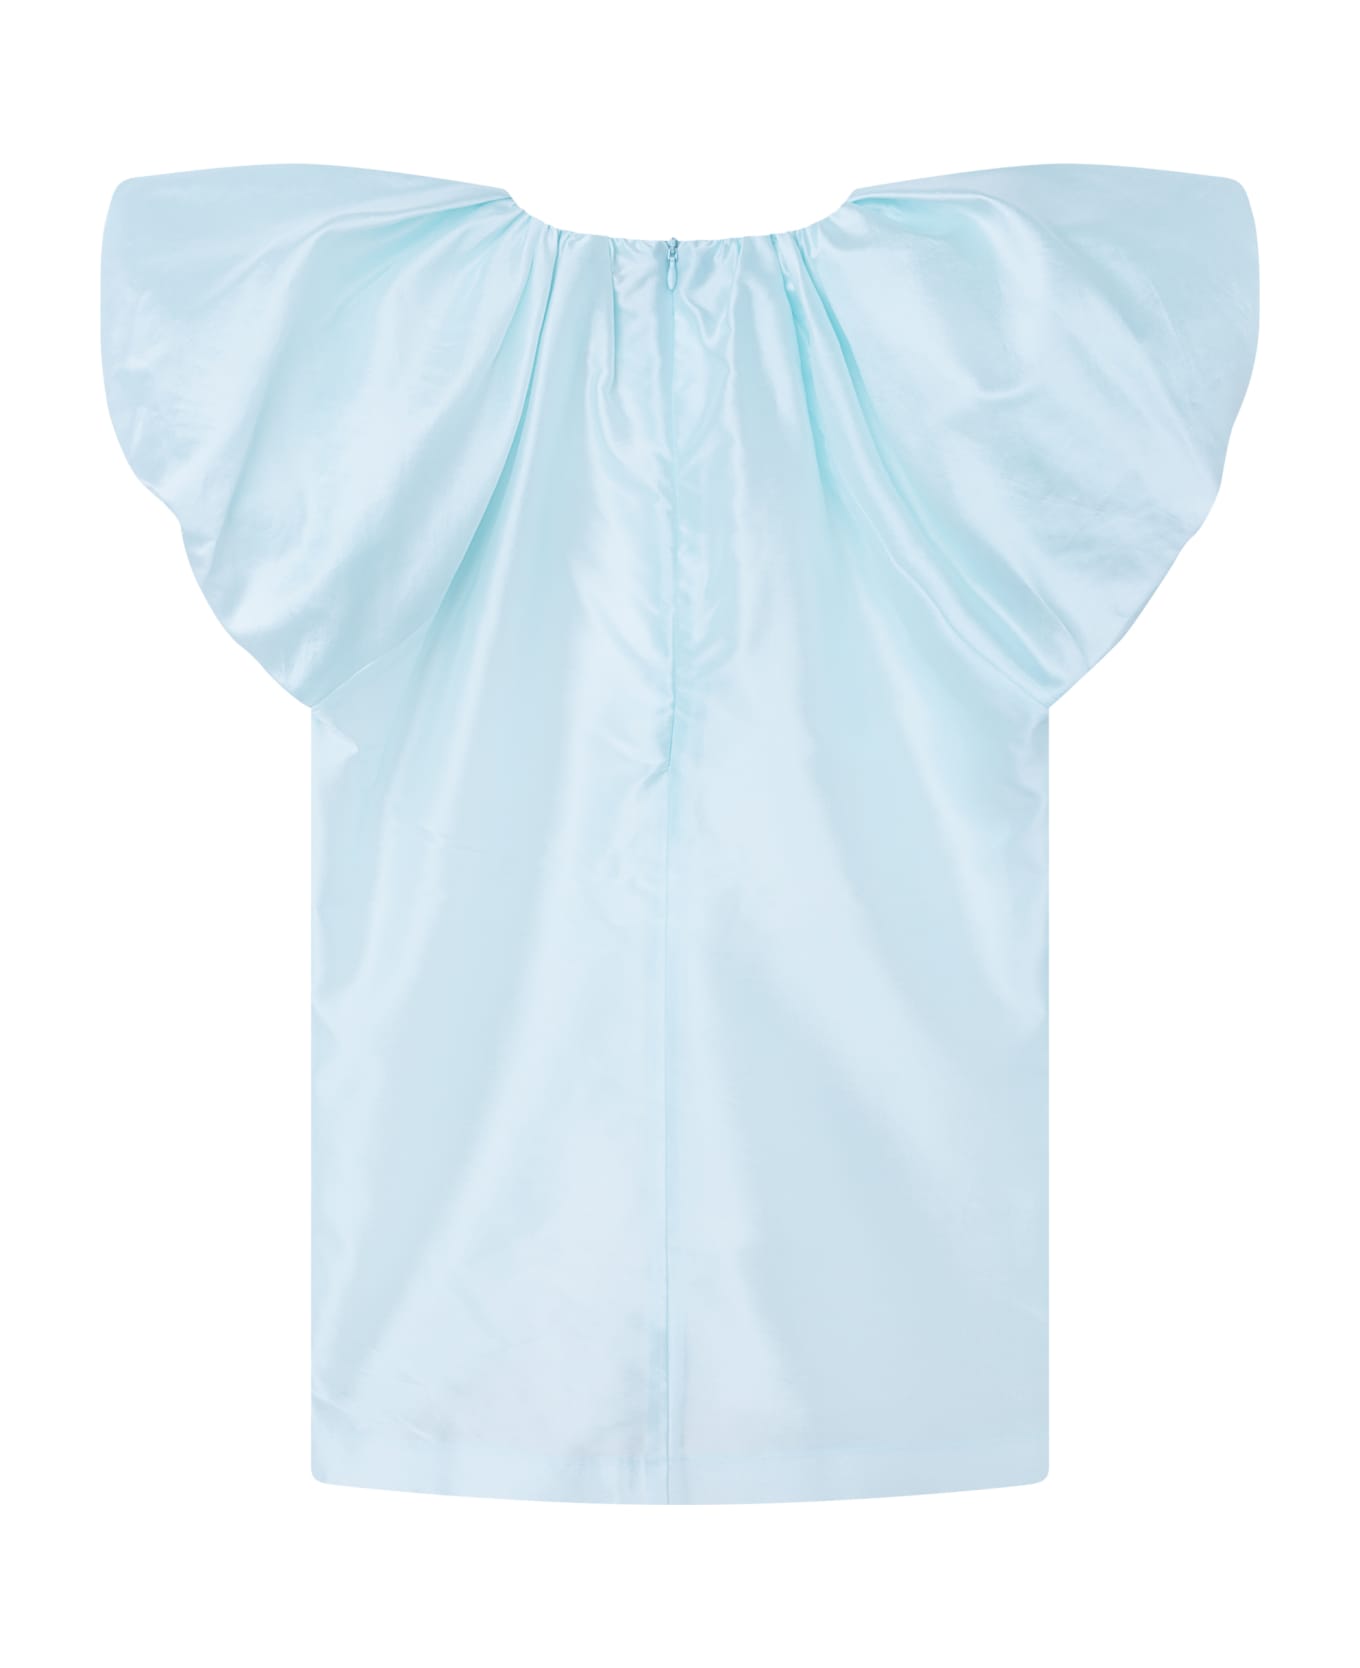 Lanvin Dress With Balloon Sleeves - Light blue